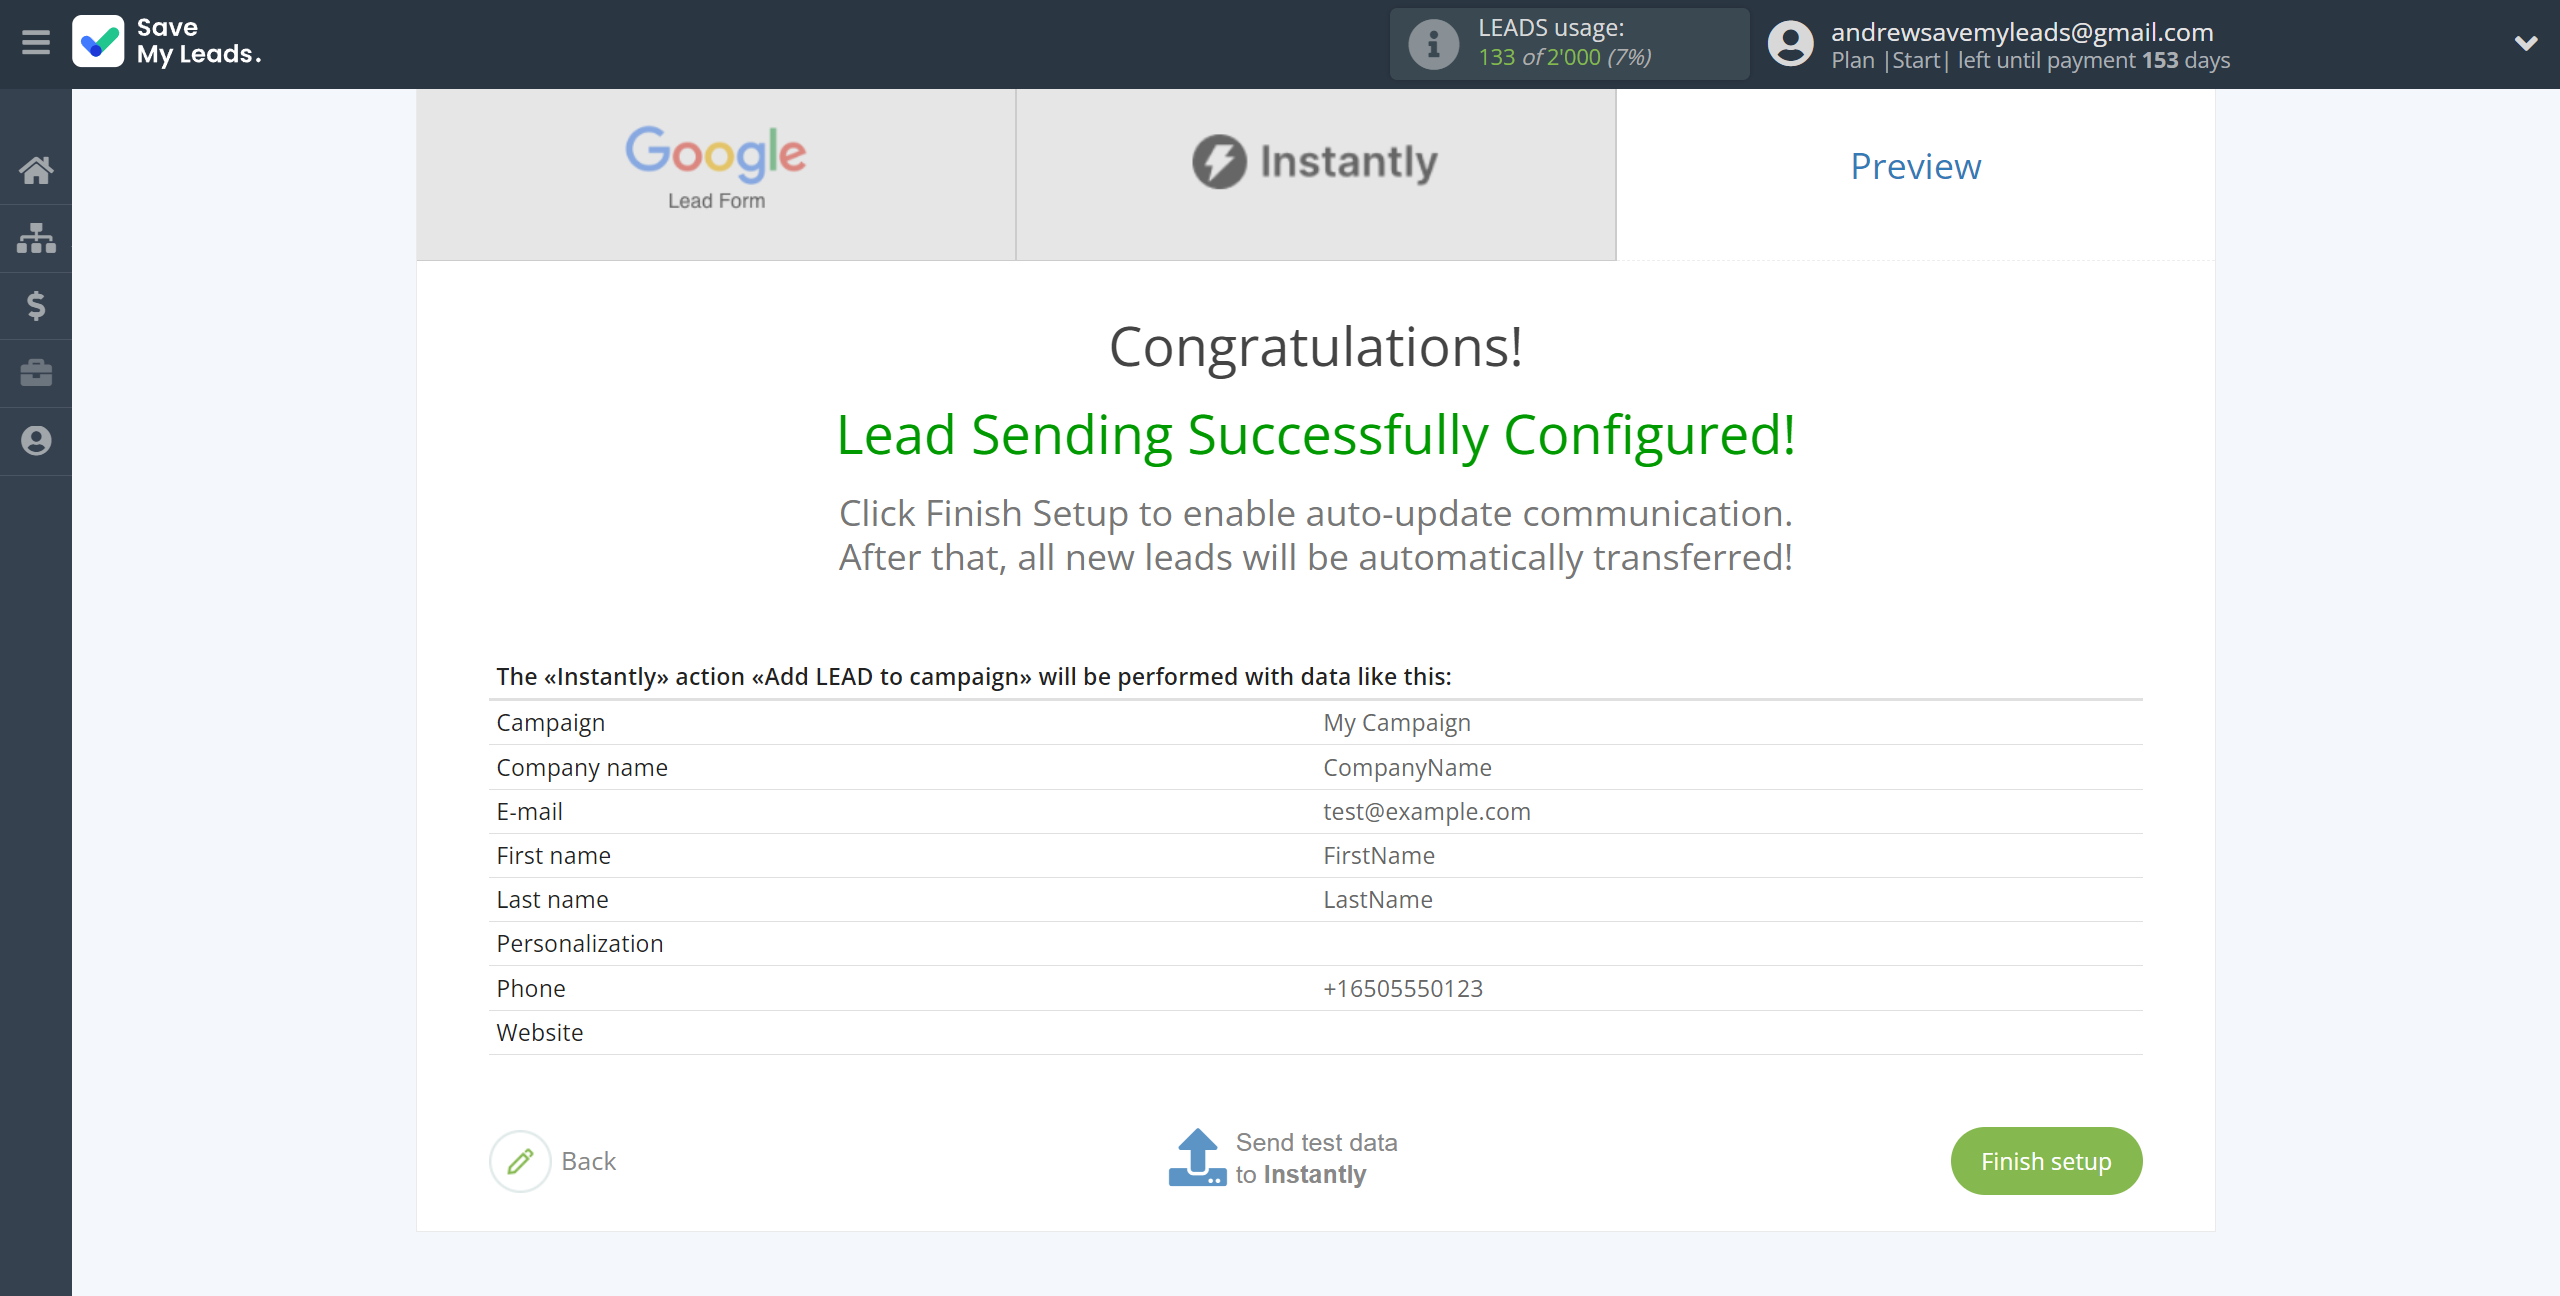 How to Connect Google Lead Form with Instantly Add lead to campaign | Test data